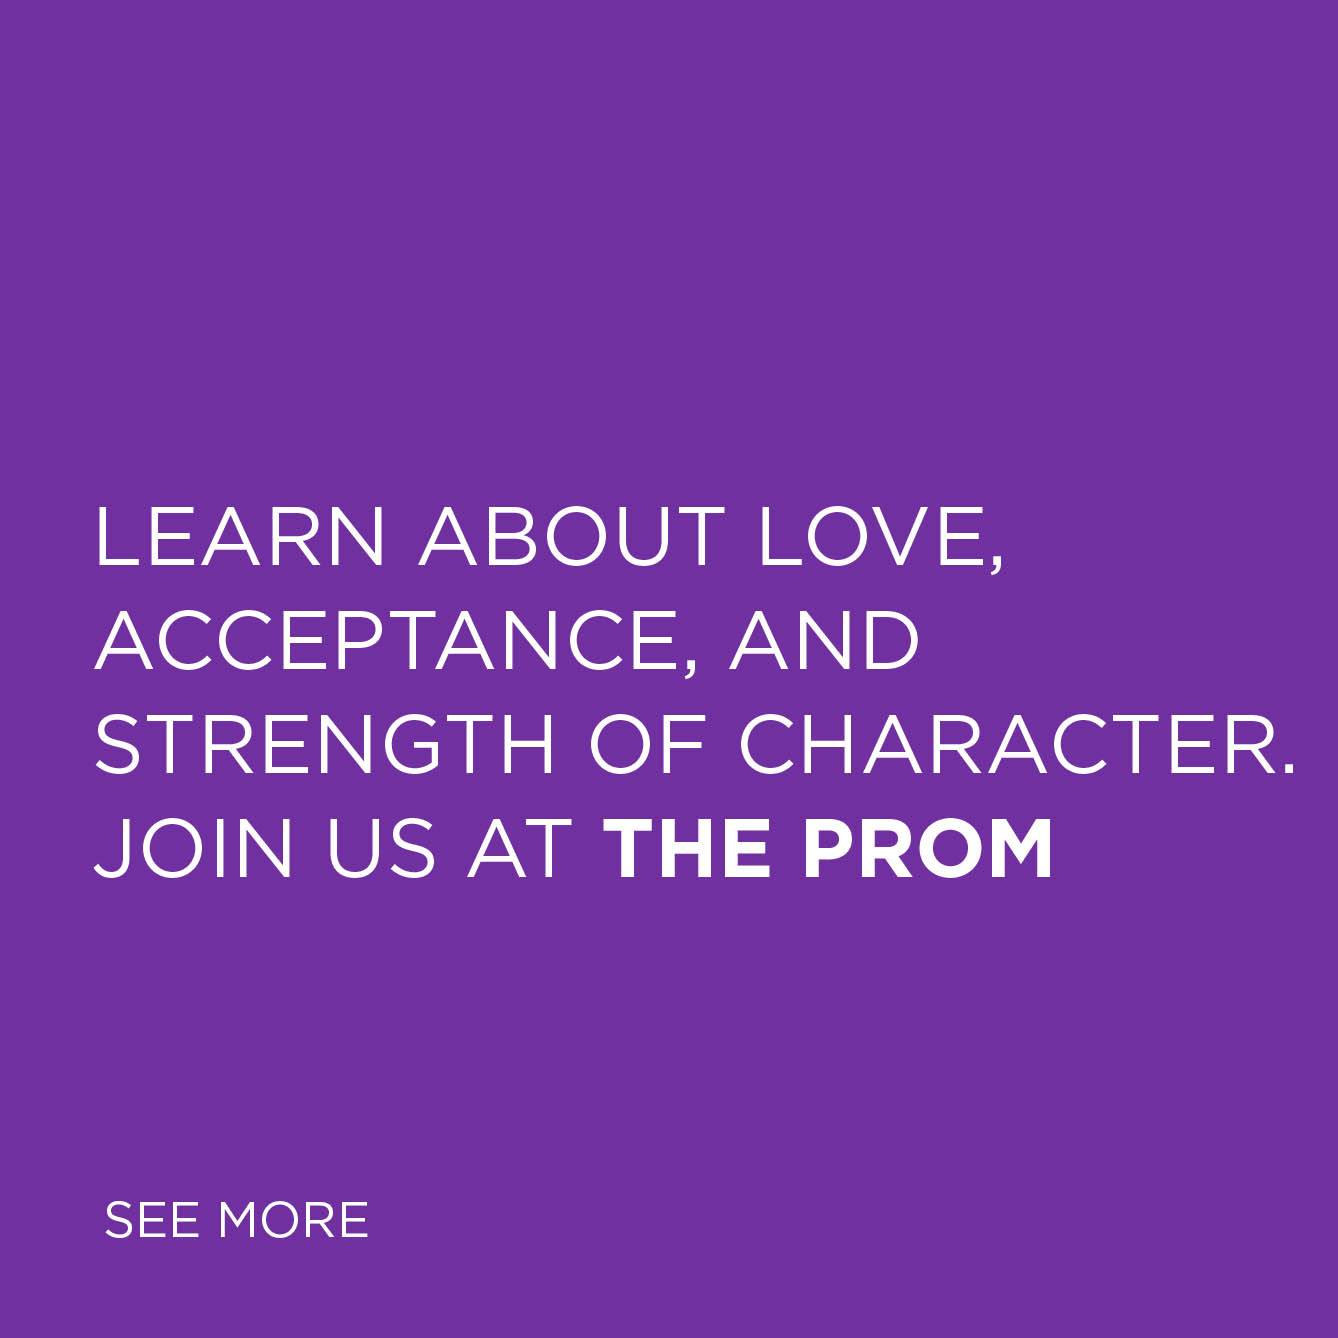 Learn about love, acceptance, and strength of character. Join us at The Prom – see more